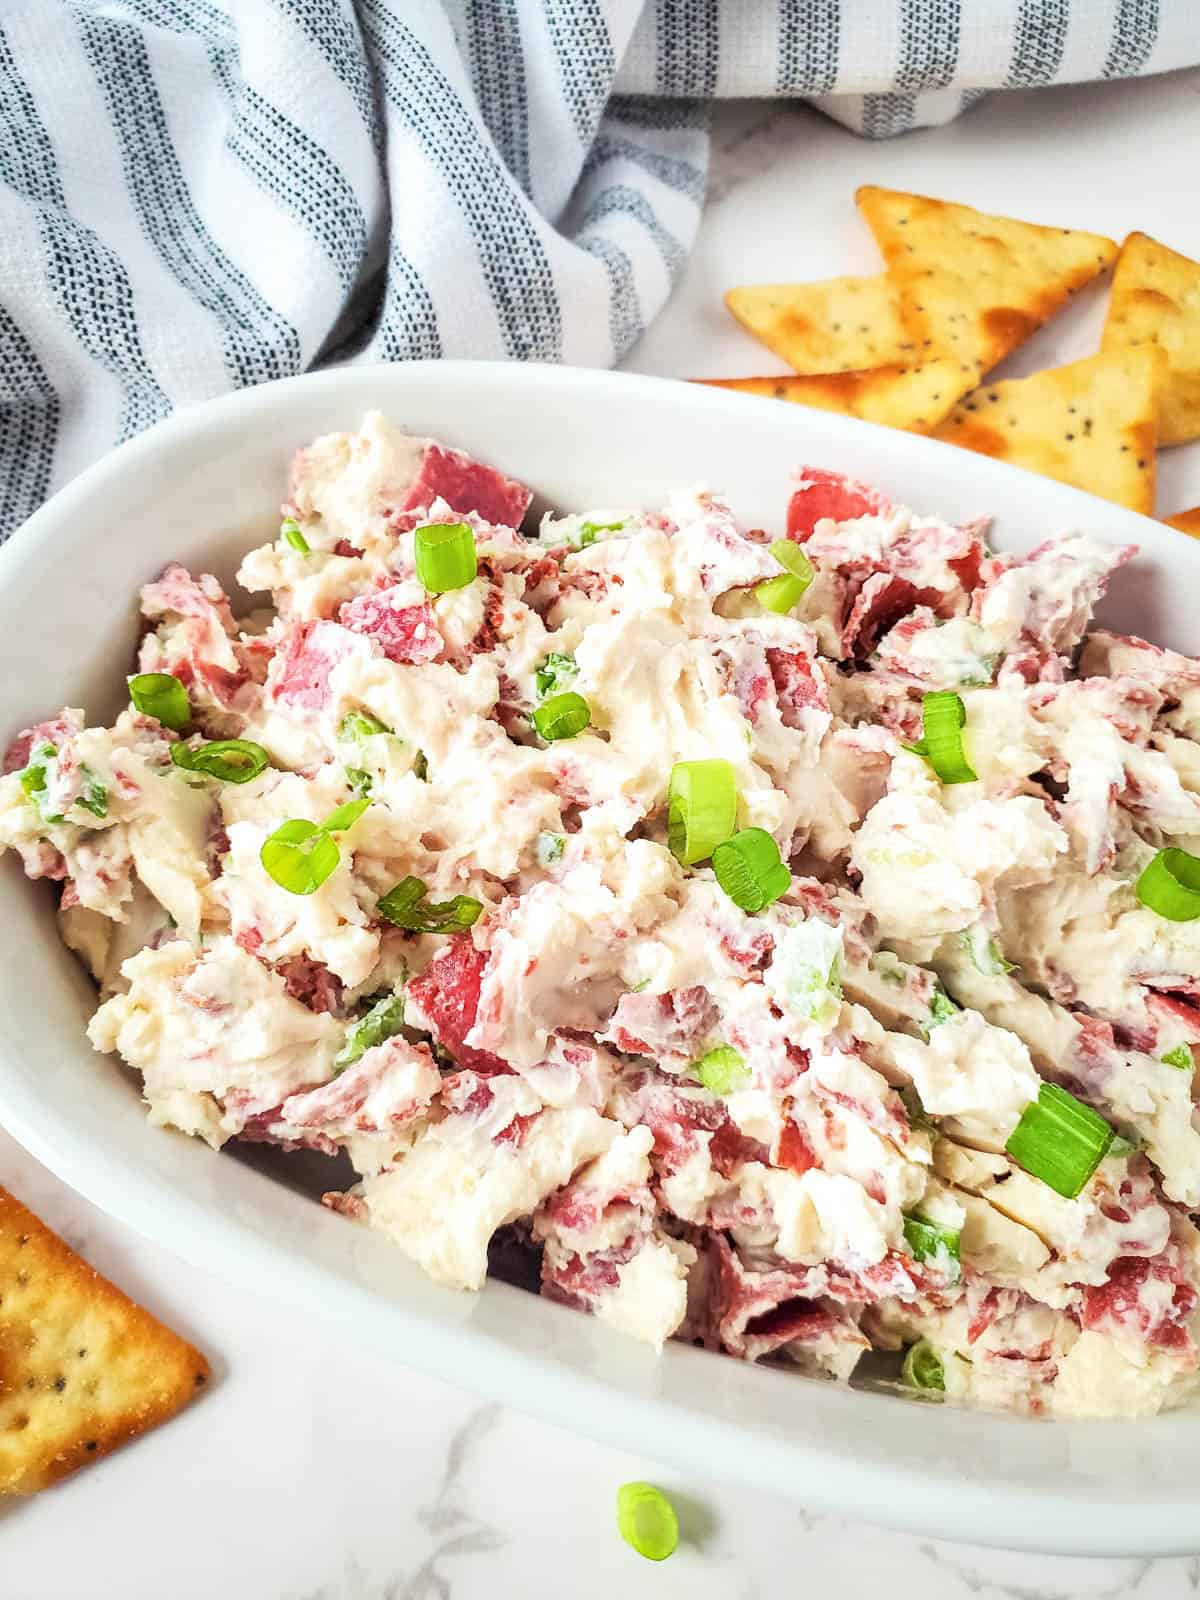 Delicious dried beef cream cheese dip with crackers and a striped towel on the side.